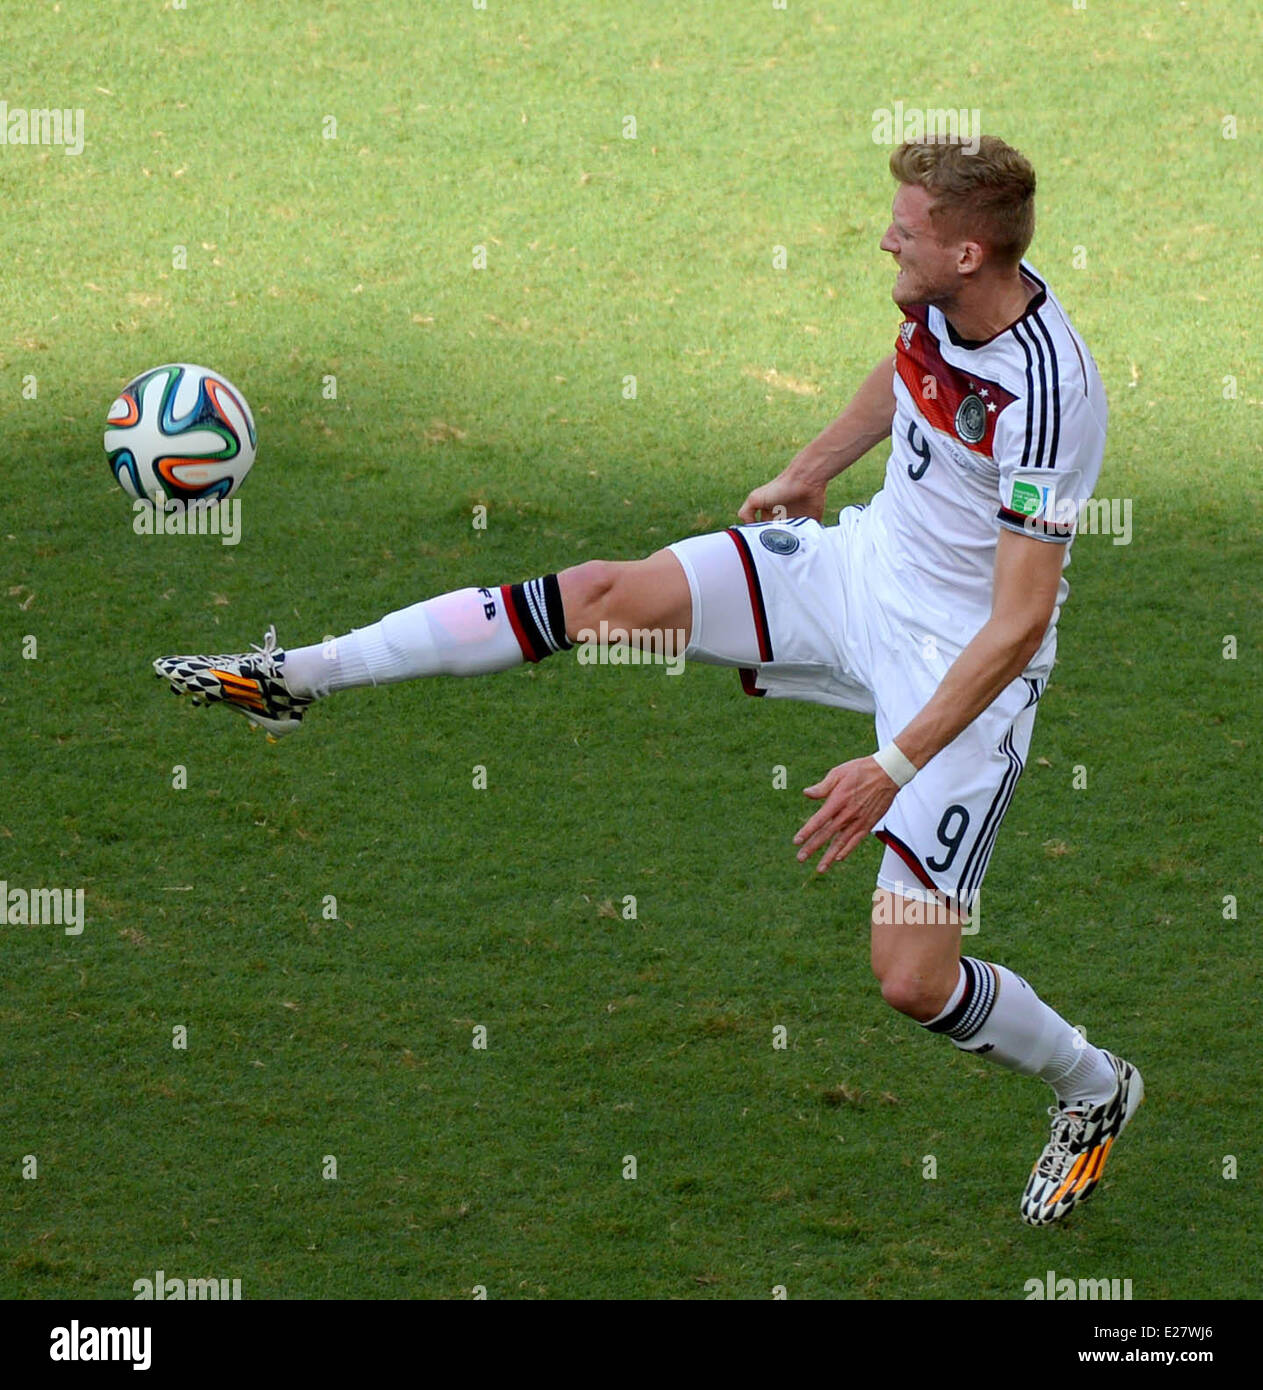 Salvador da Bahia, Brazil. 16th June, 2014. Salvador da Bahia, Brazil.  16th June, 2014. Salvador, Brazil. 16th June, 2014. Germany's Andre Schuerrle in action during the FIFA World Cup 2014 group G preliminary round match between Germany and Portugal at the Arena Fonte Nova in Salvador, Brazil, 16 June 2014. Photo: Thomas Eisenhuth/dpa/Alamy Live News Credit:  dpa picture alliance/Alamy Live News Stock Photo